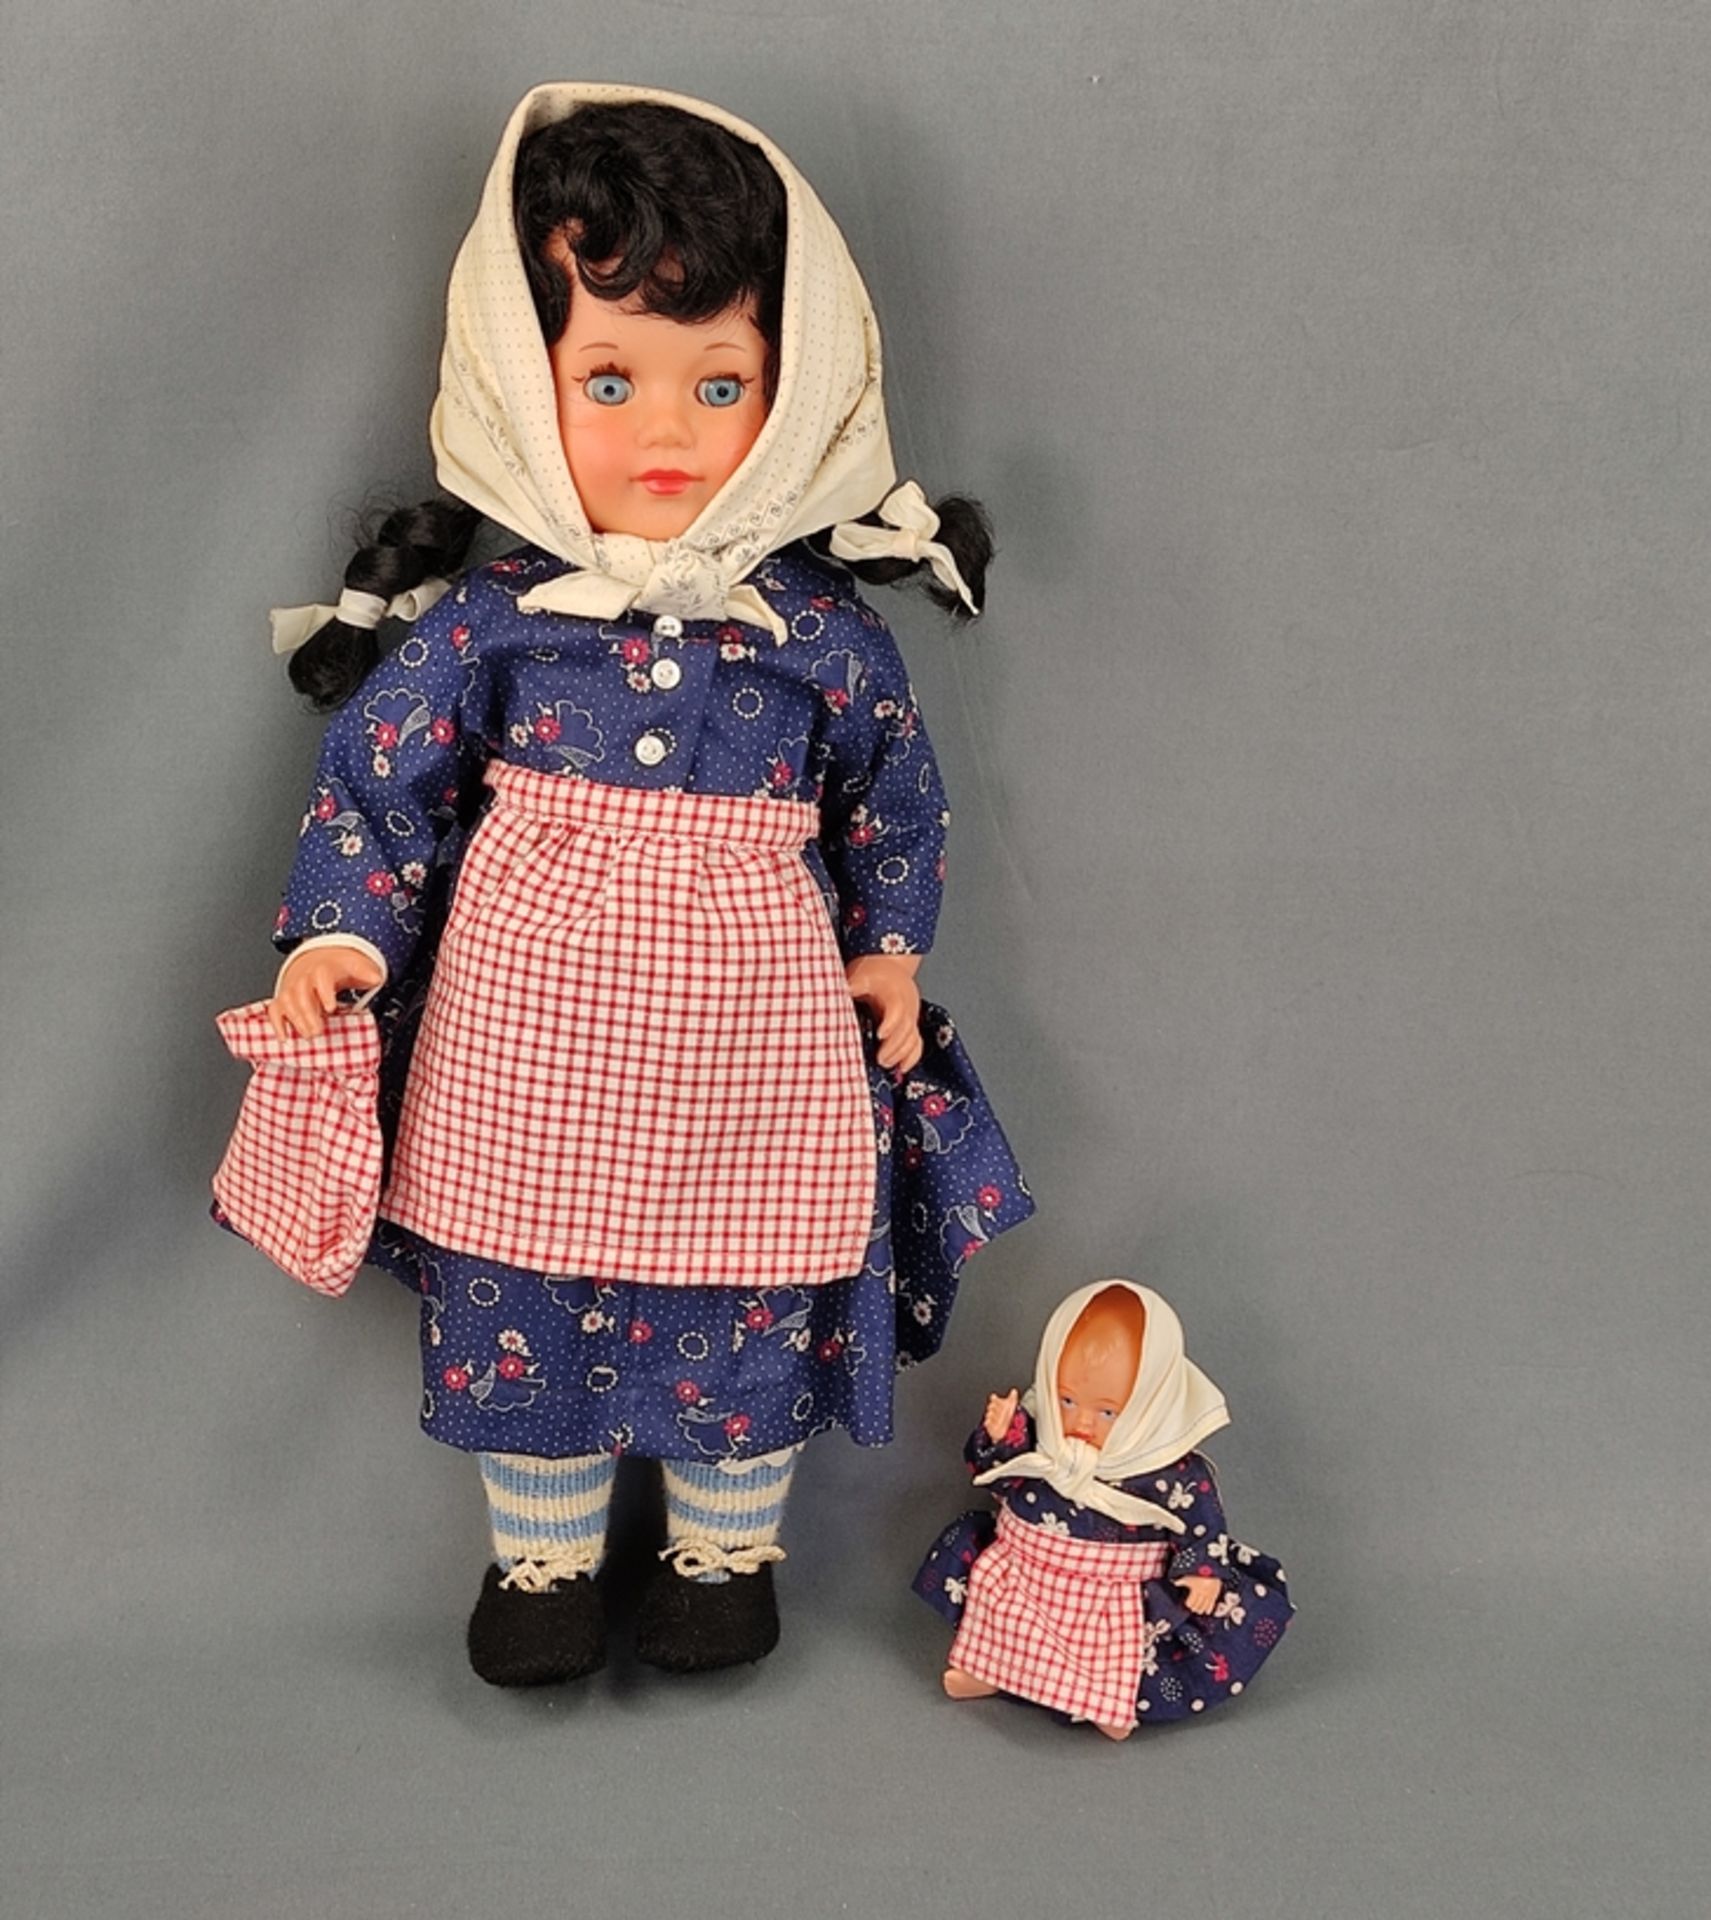 Schildkröt doll with baby, in peasant clothes and original box, sleeping eyes and tilting voice, ne